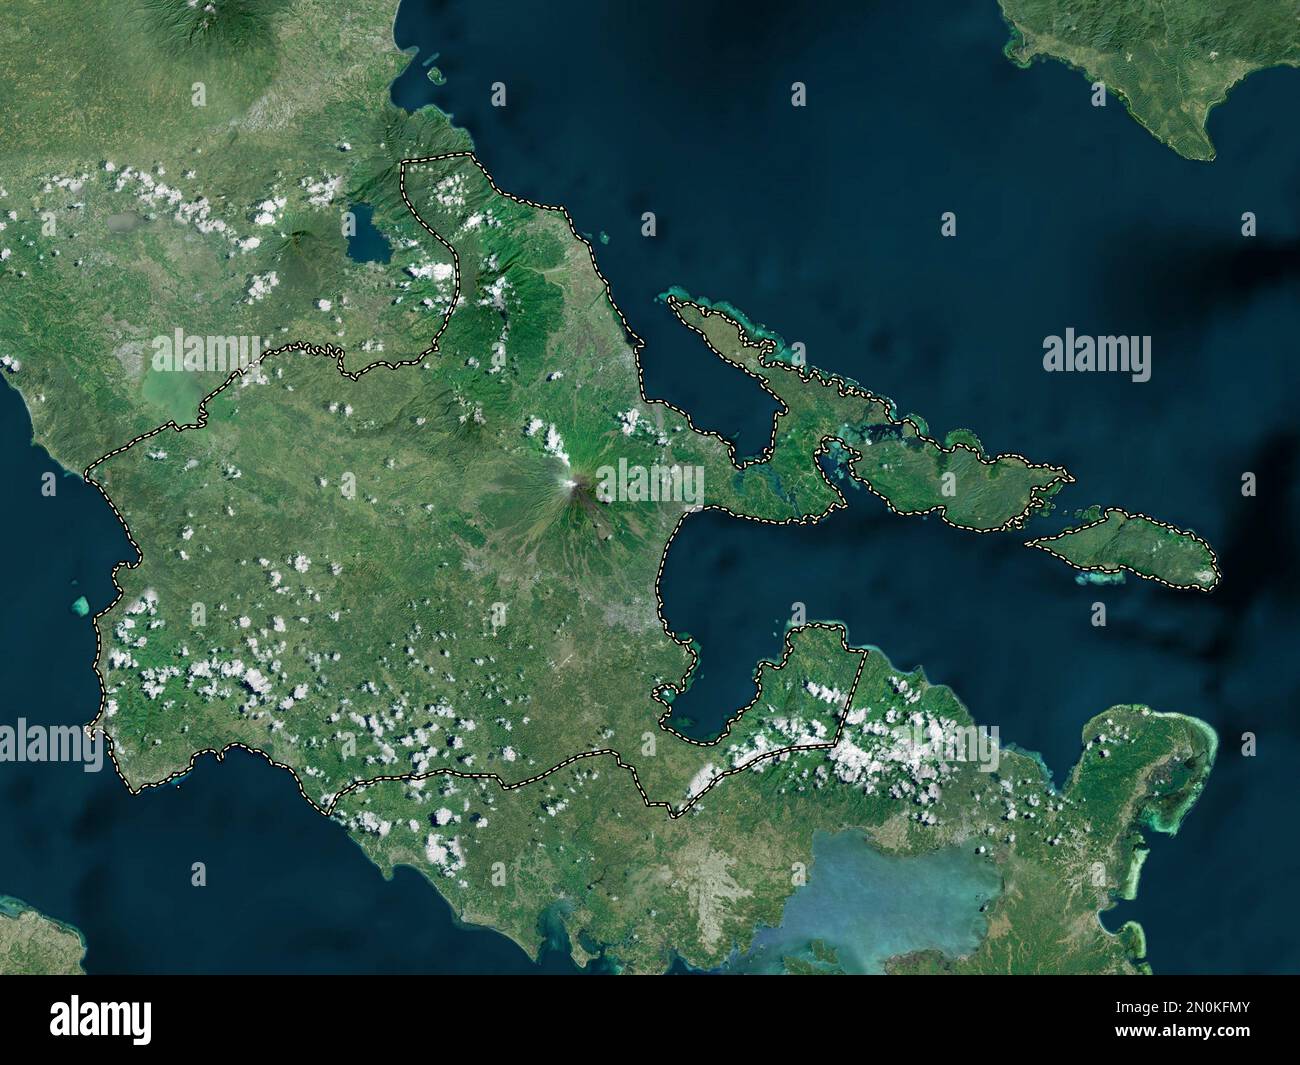 Albay, province of Philippines. High resolution satellite map Stock Photo